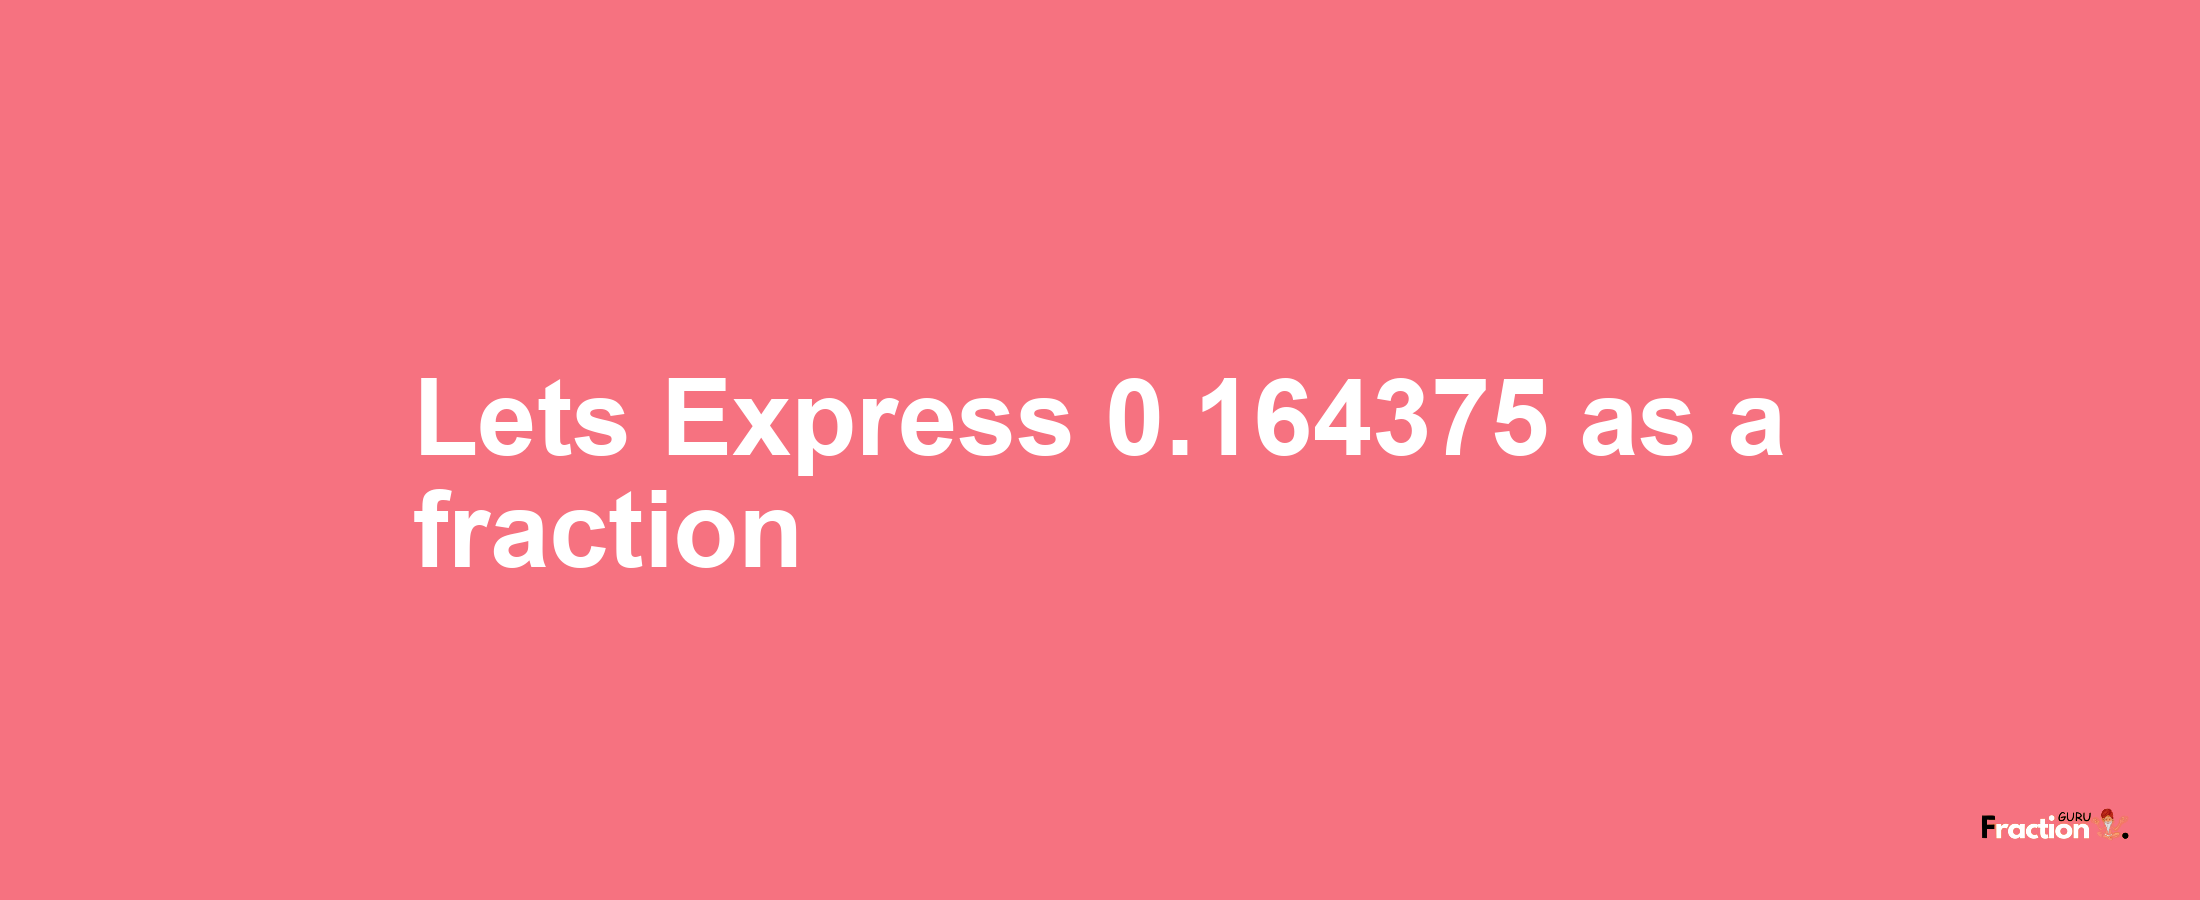 Lets Express 0.164375 as afraction